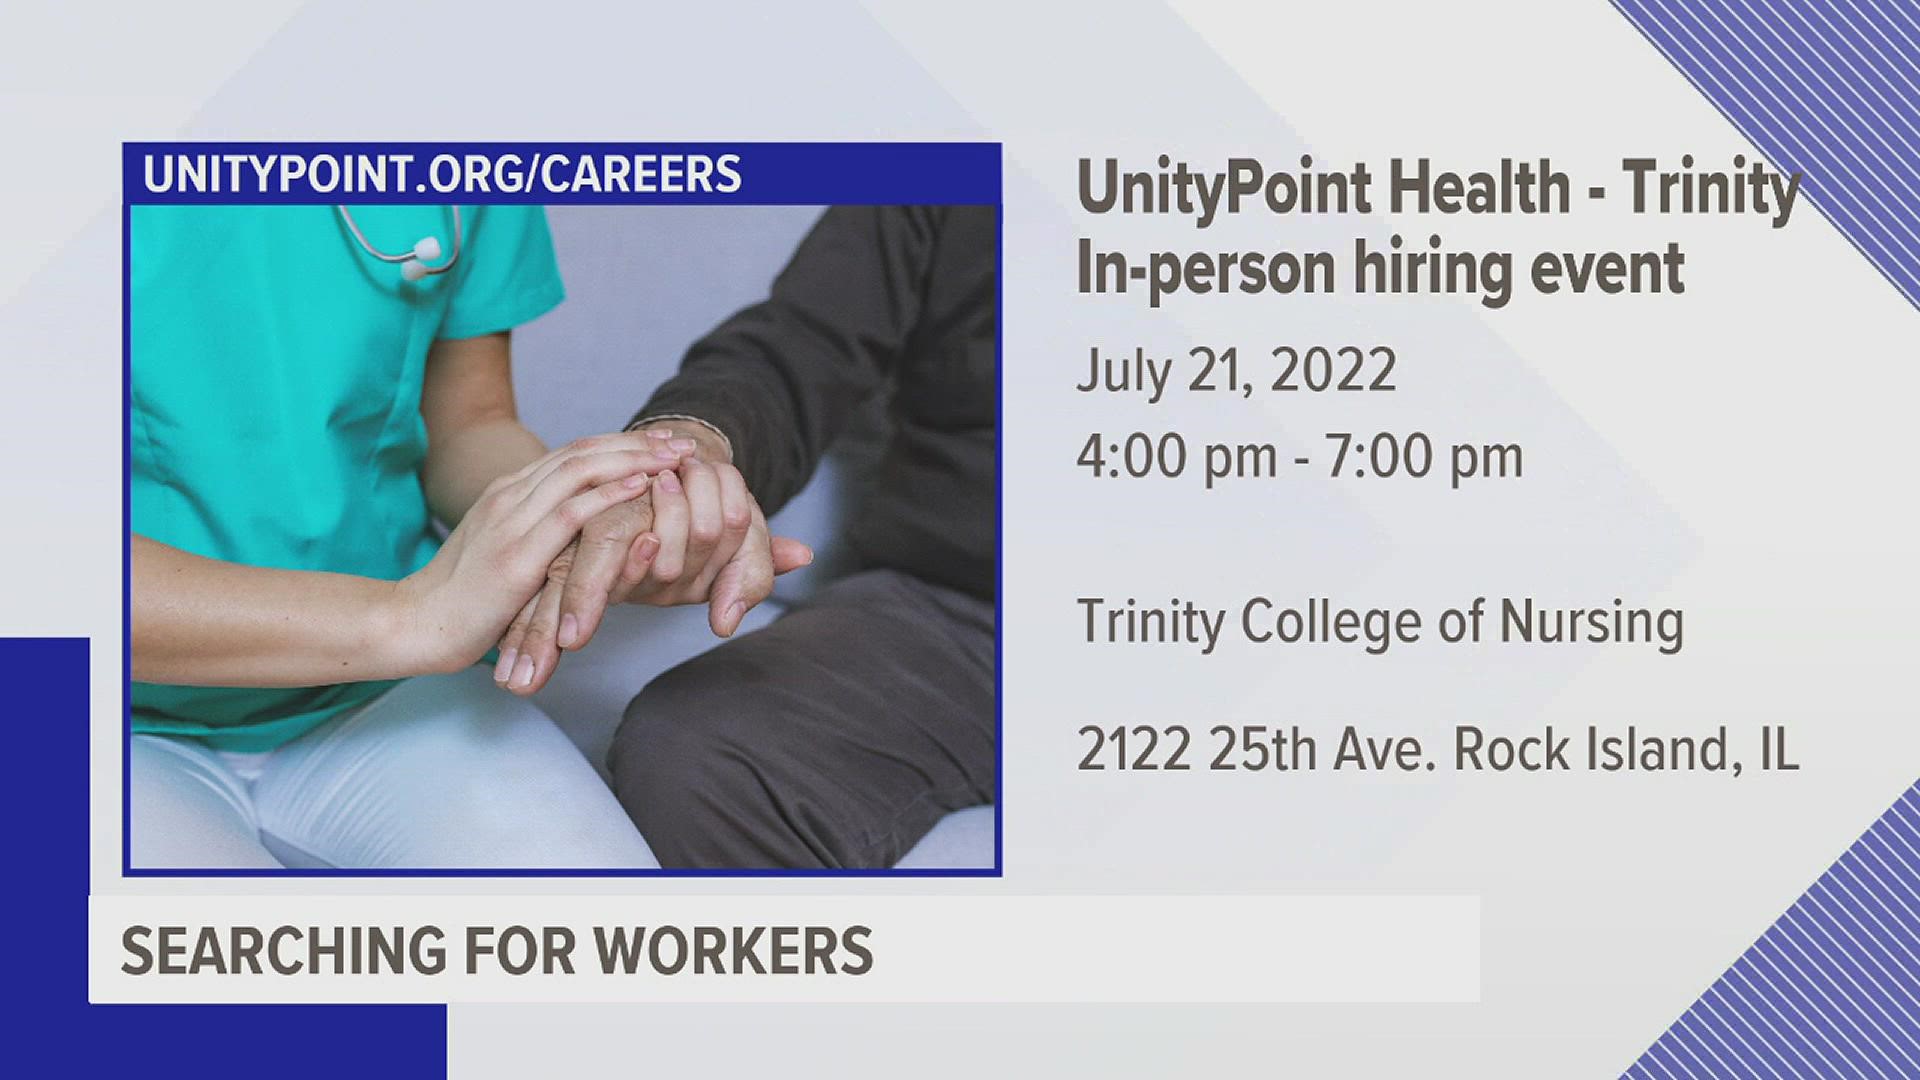 UnityPoint Health has about 400 open positions across its facilities. It will host an in-person hiring event 4-7 p.m. Thursday at Trinity College of Nursing.